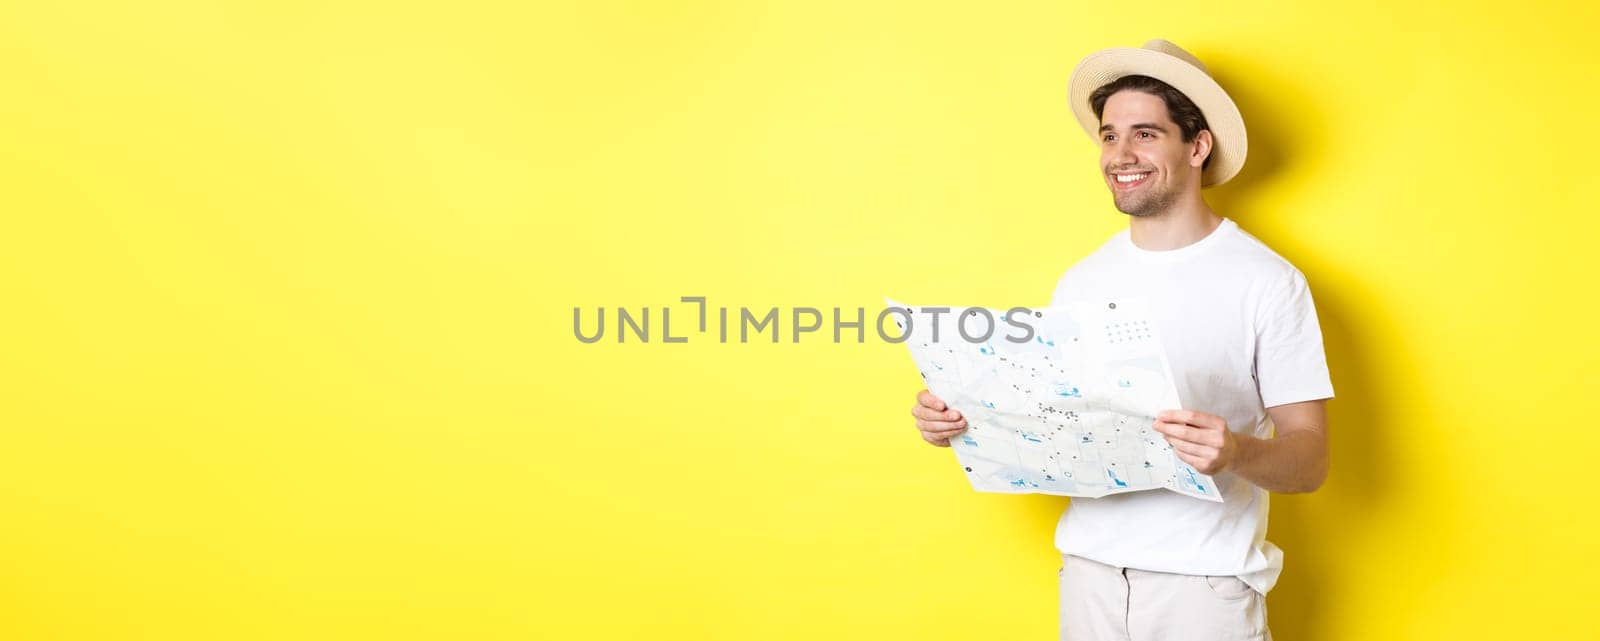 Travelling, vacation and tourism concept. Handsome guy tourist going sightseeing, holding map and smiling, standing over yellow background.